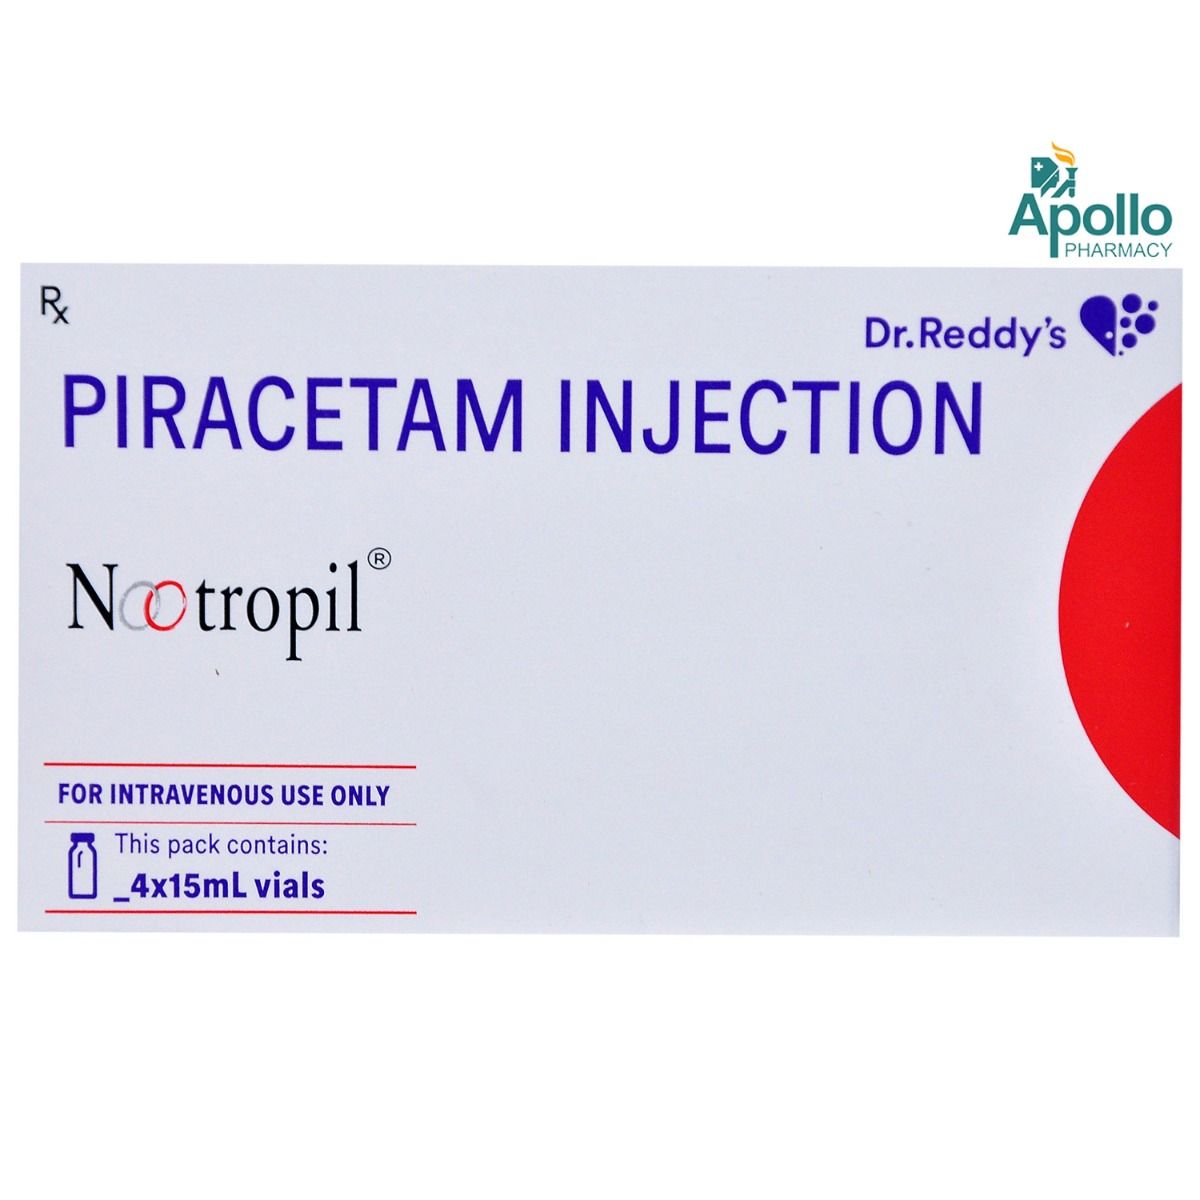 NOOTROPIL 15ML INJECTION 3GM , Pack of 1 INJECTION